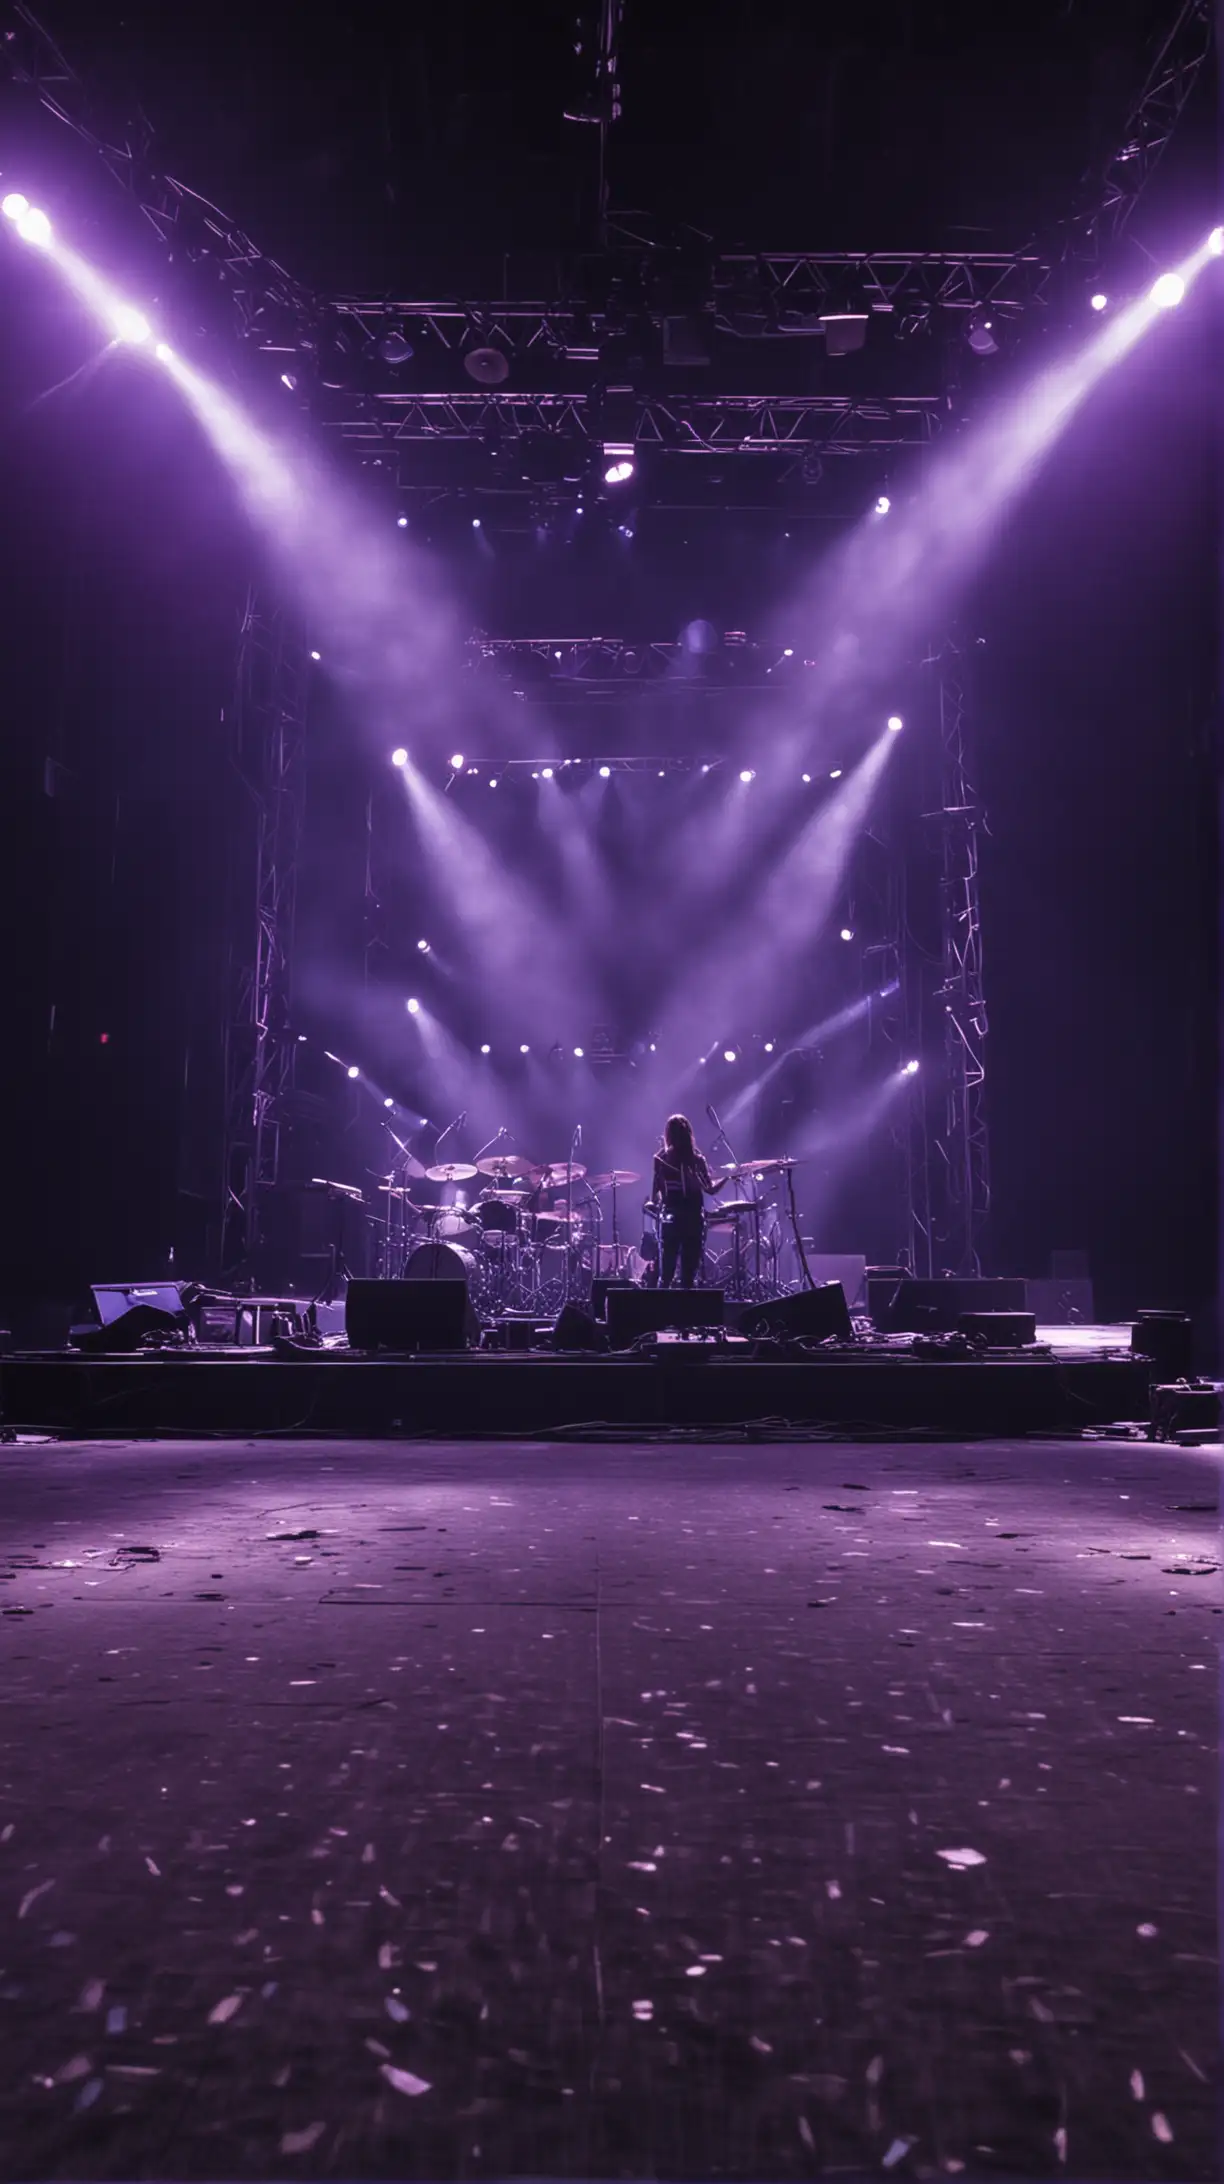 Empty Rock Concert Stage with Purple and Blue Lights